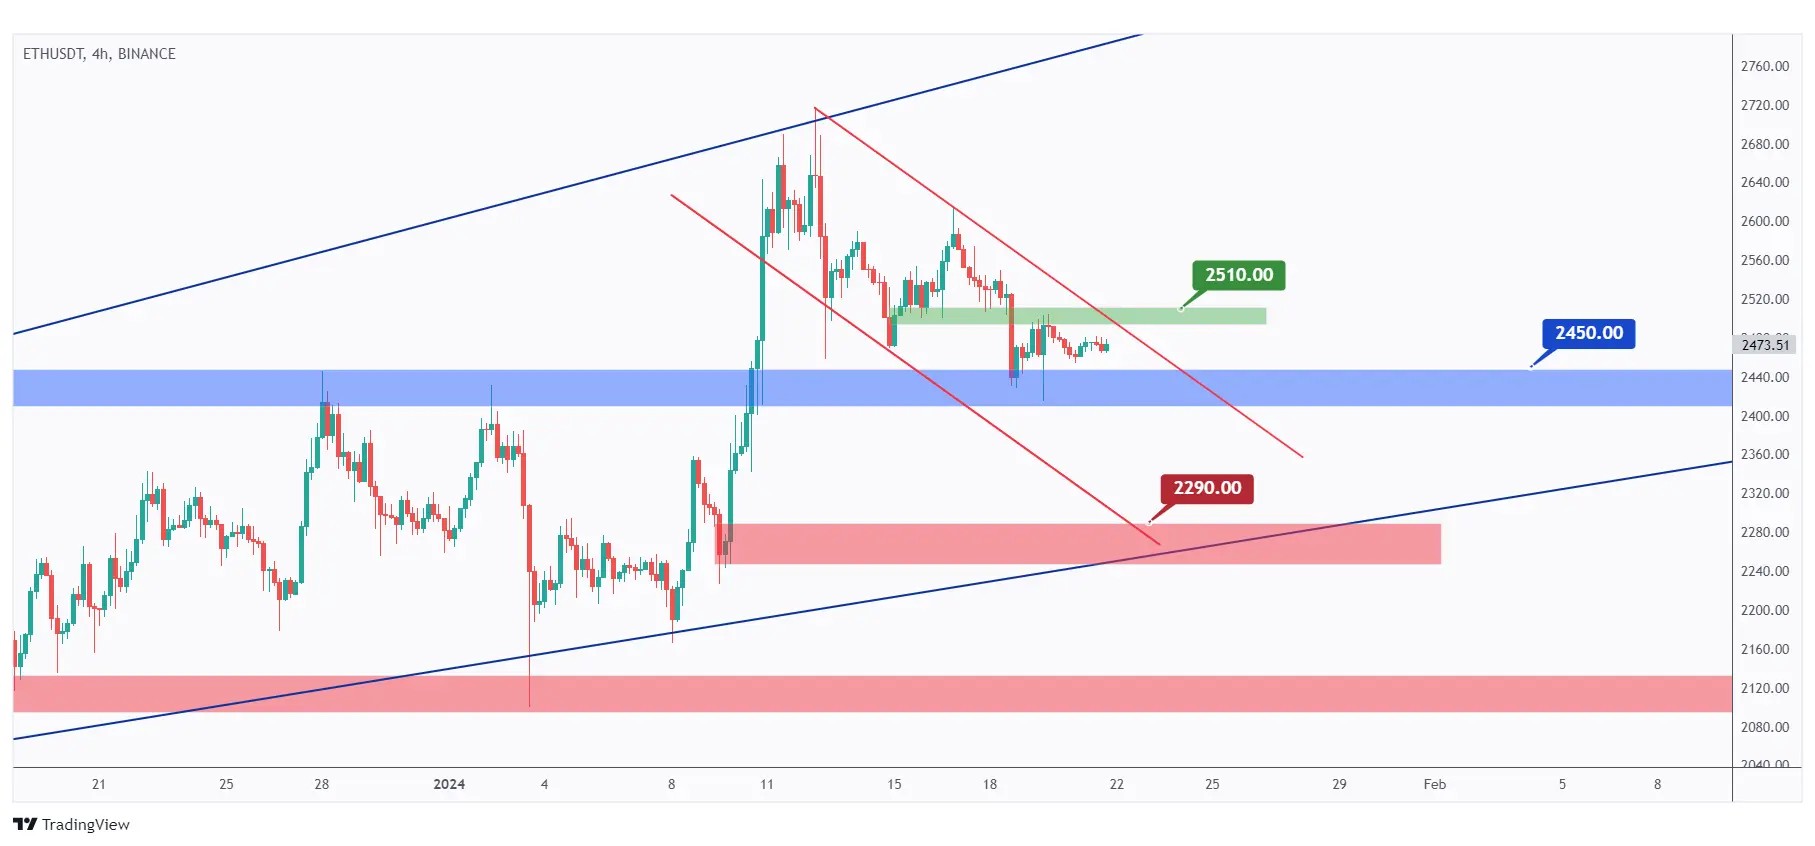 ETH 4h chart remains bearish trading inside the falling red channel unless the $2510 previous major high is broken upward.